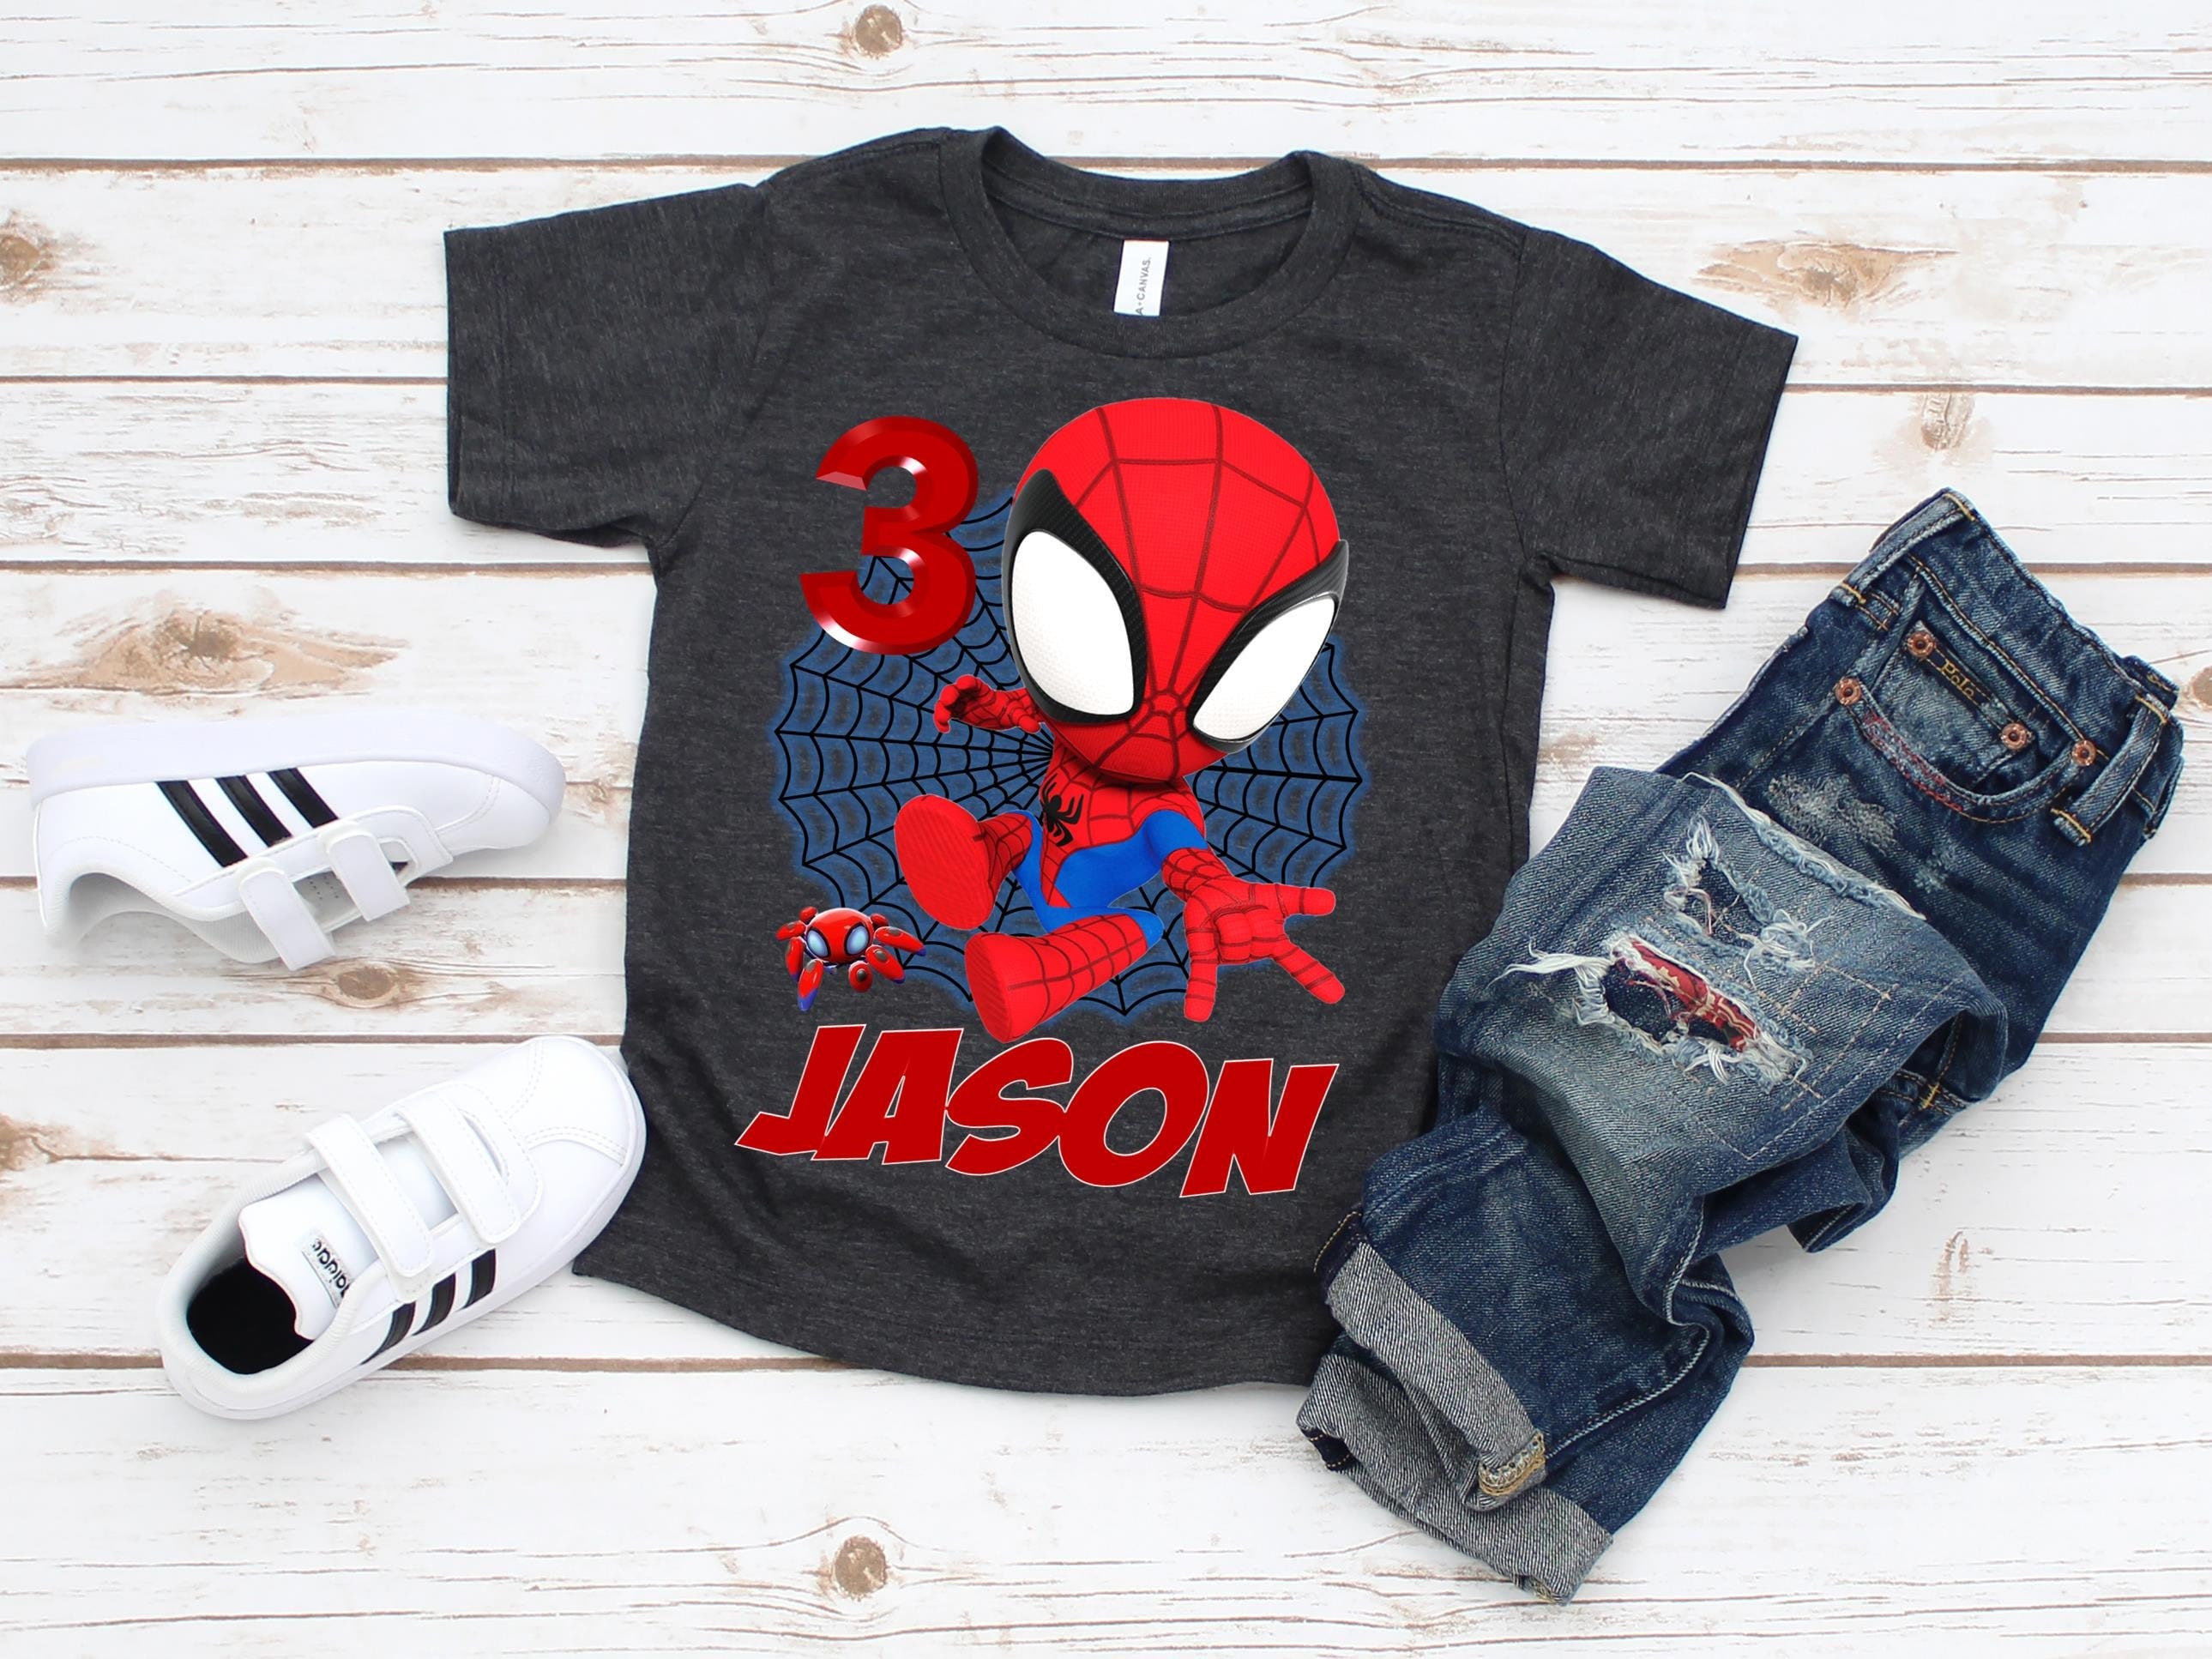 Spidey and His Amazing Friends Birthday Shirt sold by Cheryl, SKU 196325